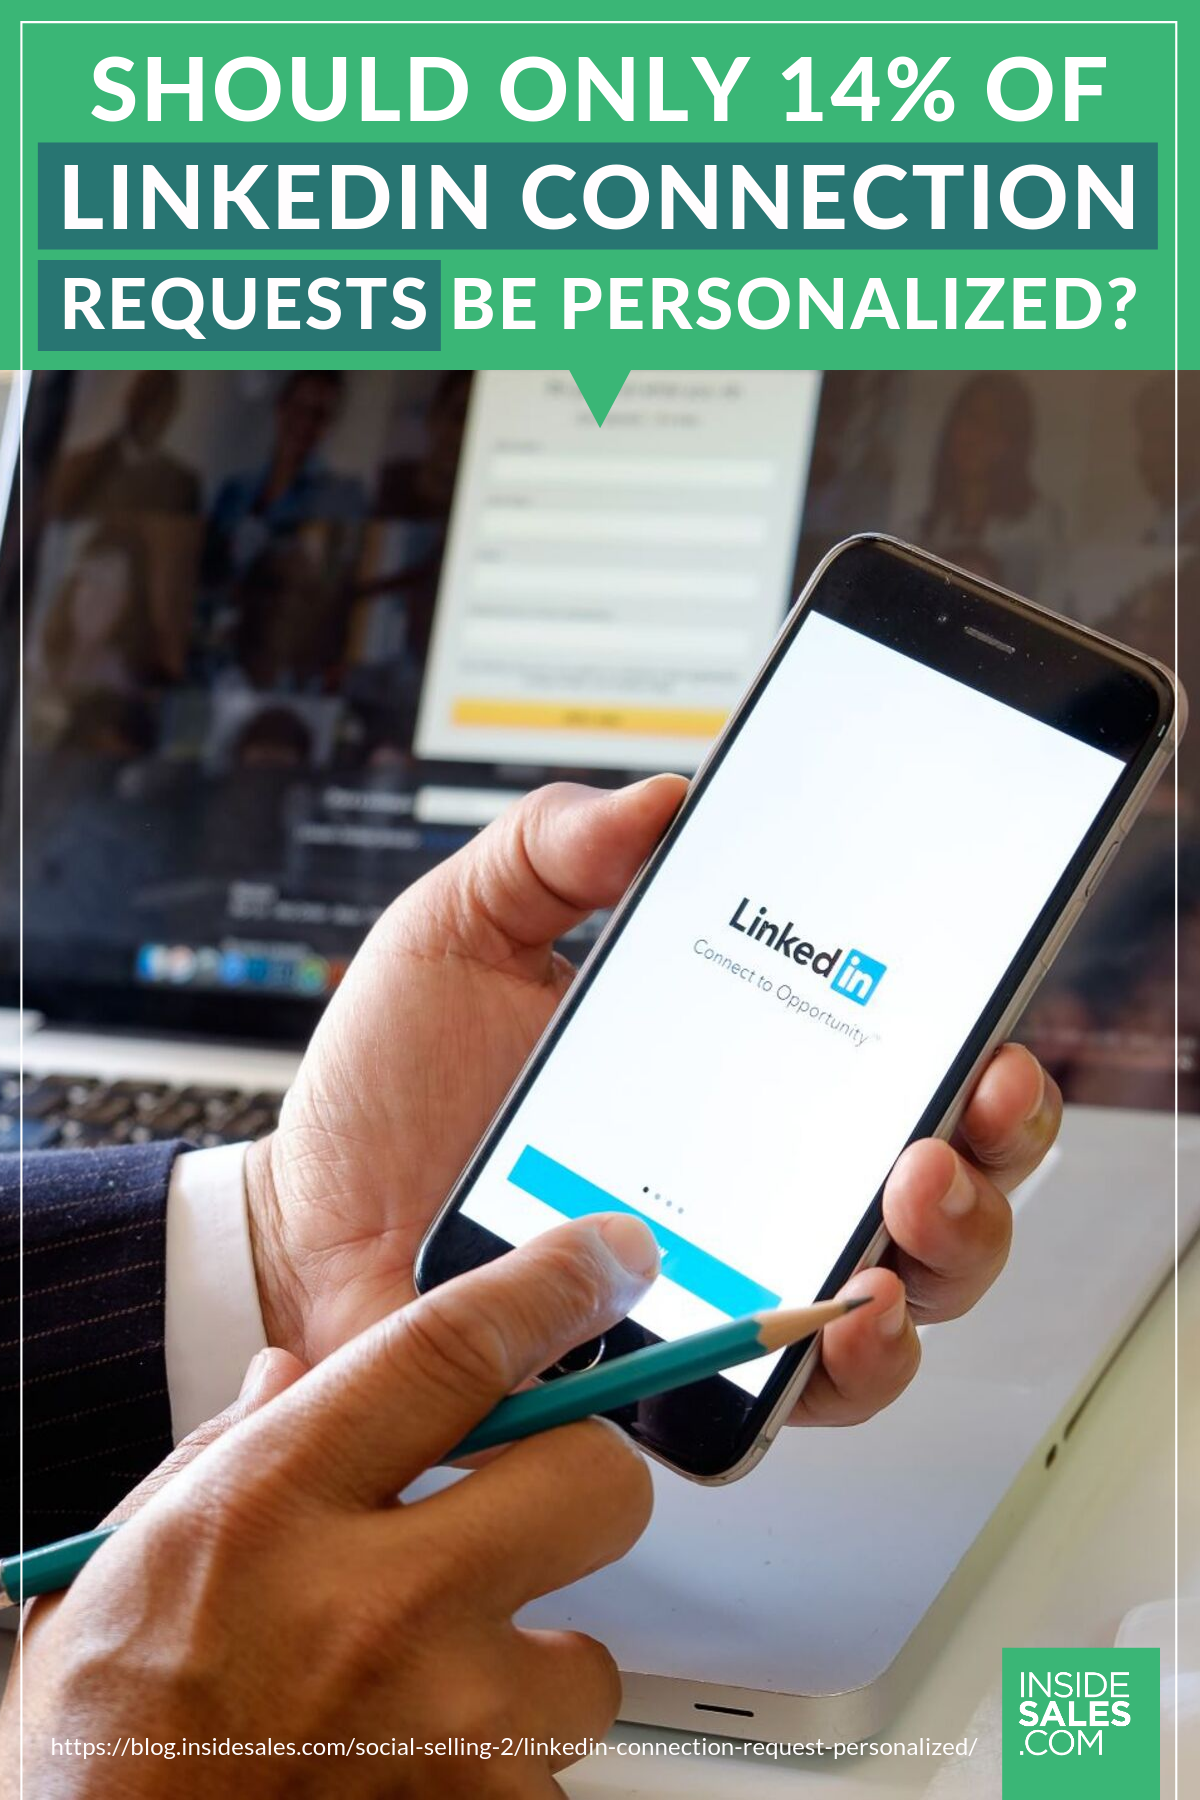 Should Only 14% Of LinkedIn Connection Requests Be Personalized? https://resources.insidesales.com/blog/social-selling-2/linkedin-connection-request-personalized/